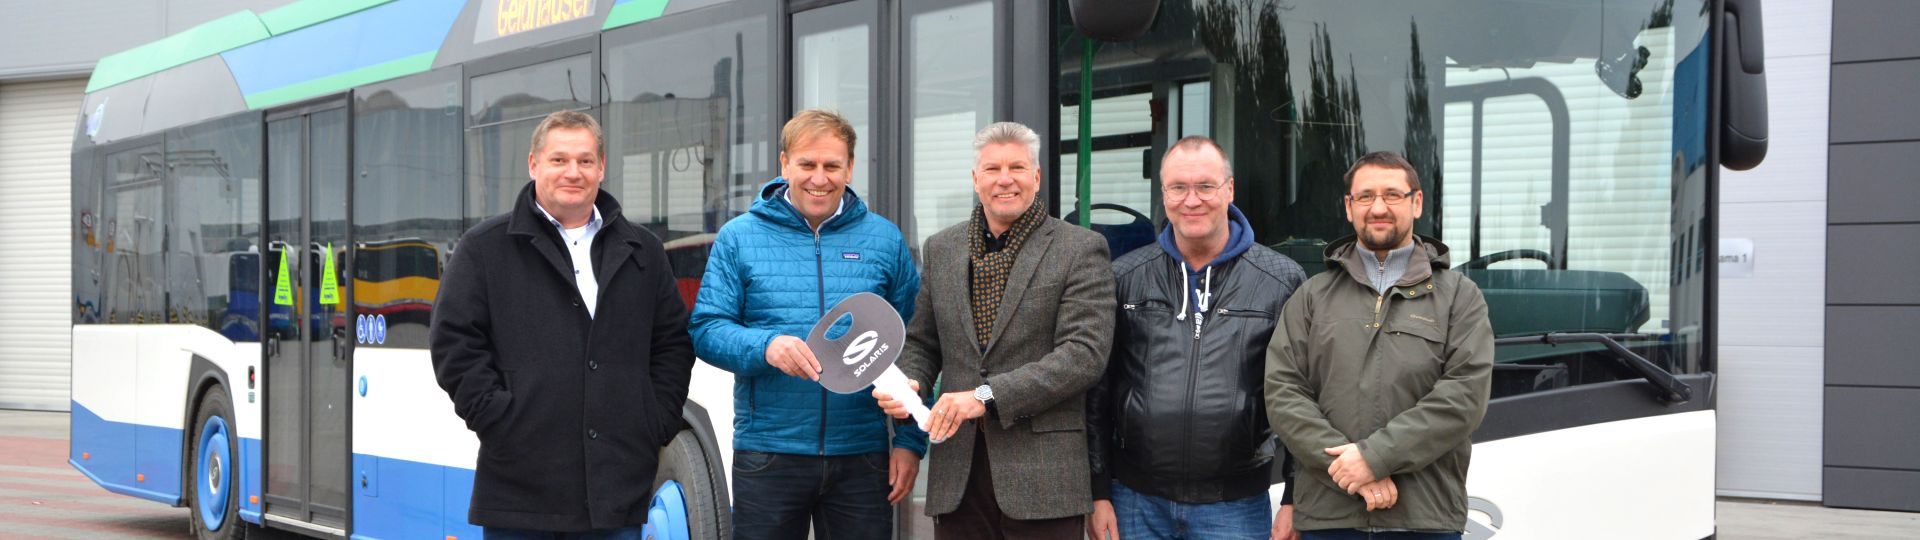 Four new generation Solaris buses handed over to Martin Geldhauser GmbH & Co. KG